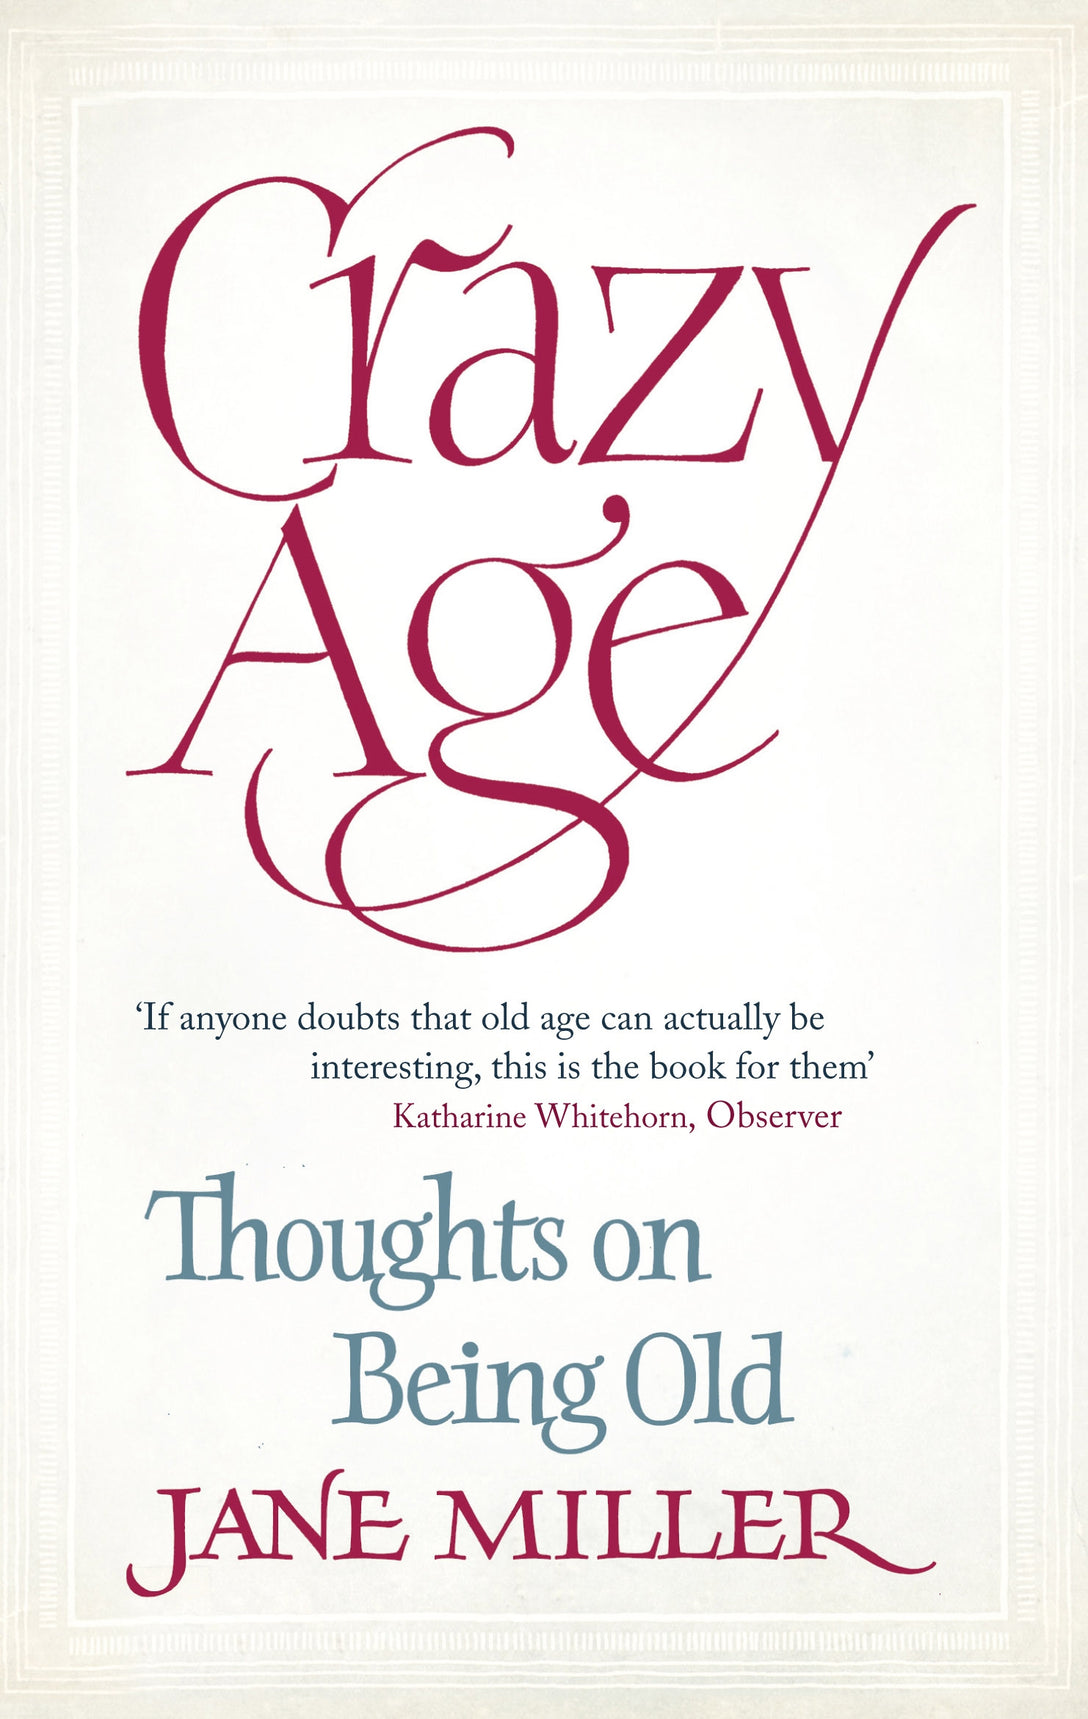 Crazy Age by Jane Miller